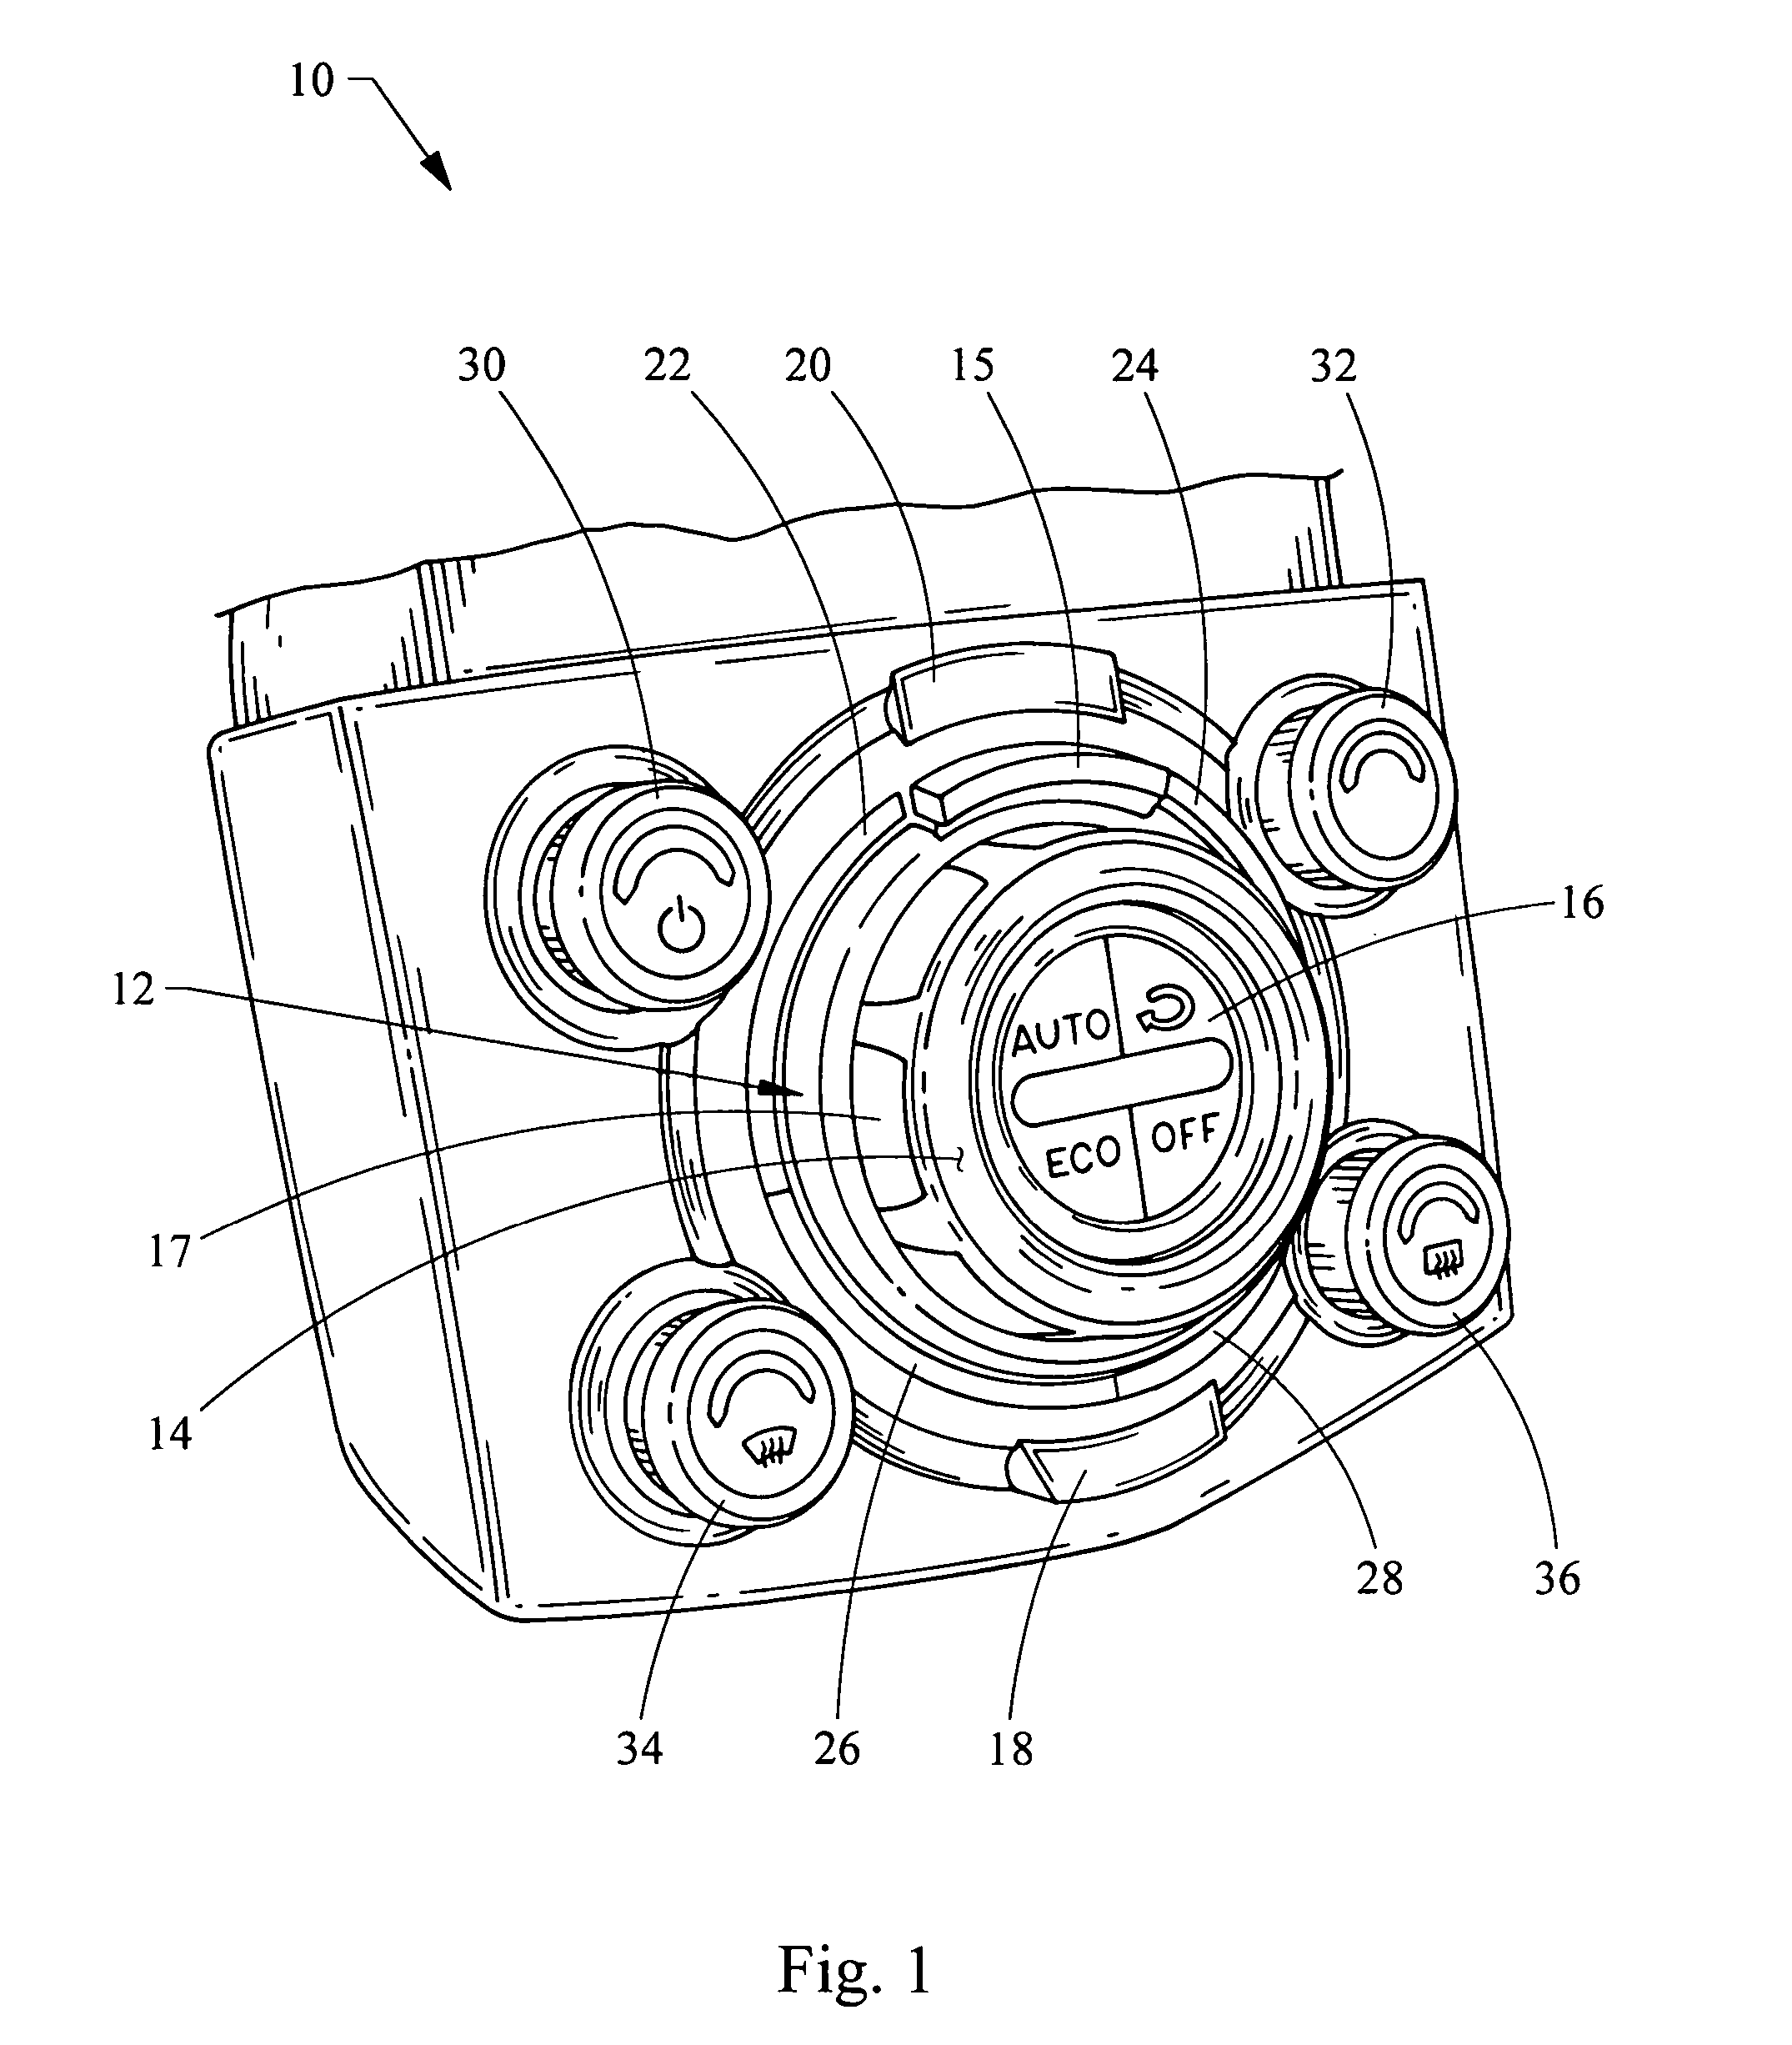 Human machine interface for a vehicle including touch sensor